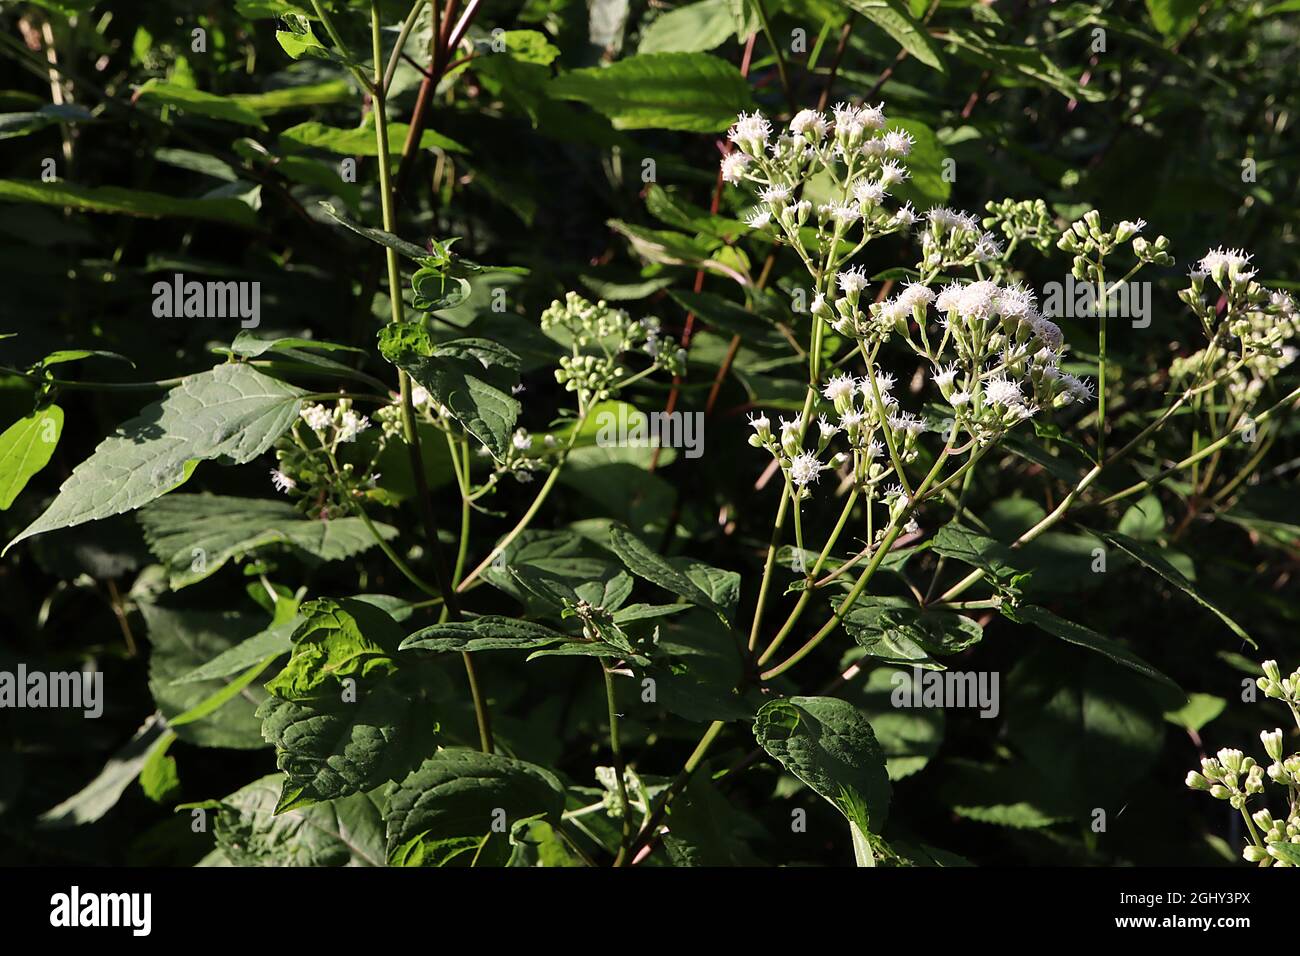 Ageratina altissima white snakeroot – corymbs of tiny white flower clusters and ovate dark green leaves,  August, England, UK Stock Photo